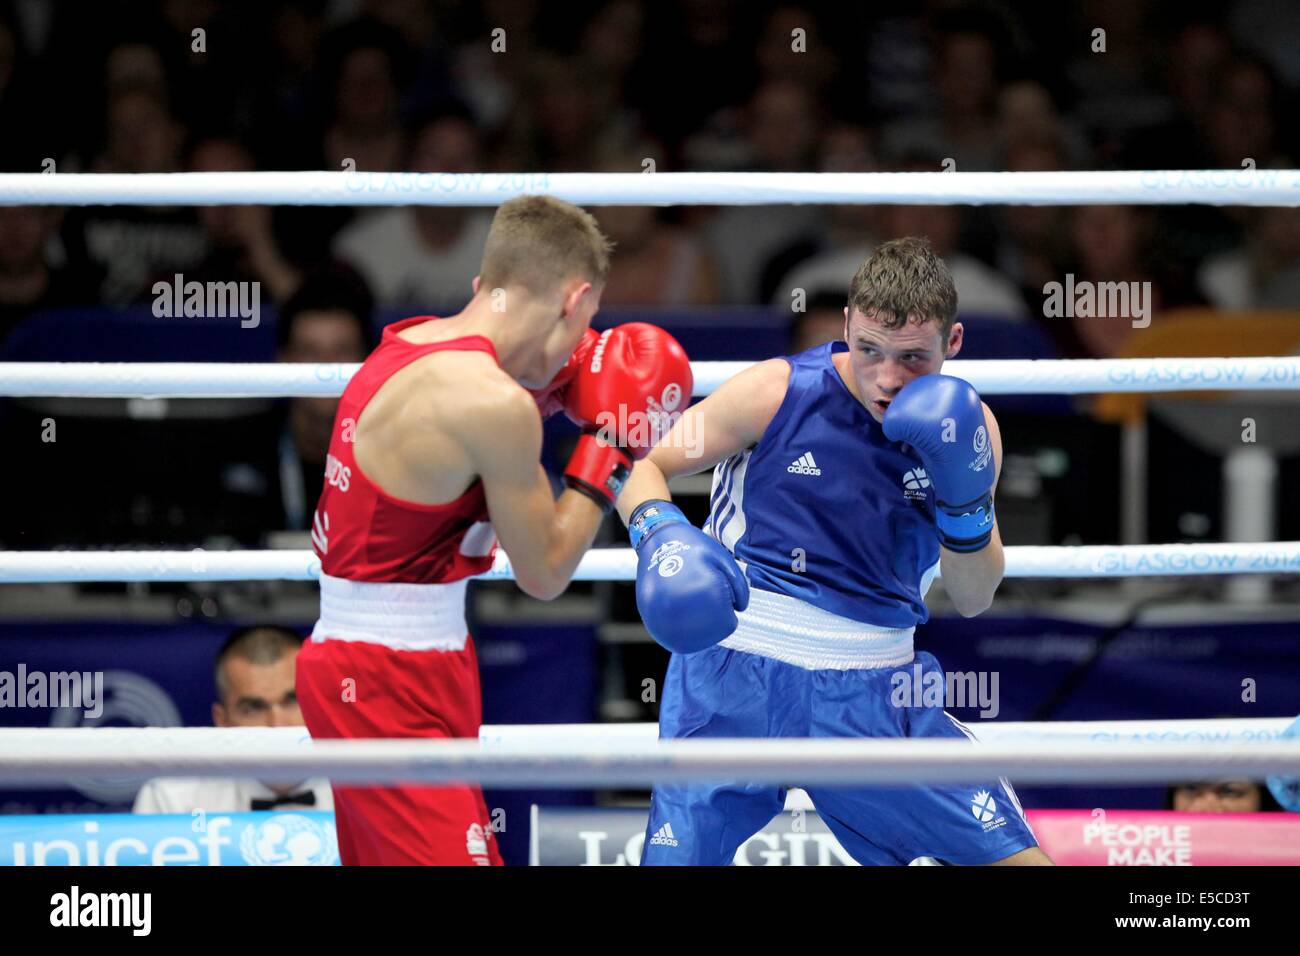 Glasgow, Scotland, UK. 27th July, 2014. Commonwealth Games day 4. Boxing - evening session.  Men's fly weight (52kg).  Reecs McFadden (Scotland, blue) beats Charlie Edwards (England, red) in the preliminaries Credit:  Neville Styles/Alamy Live News Stock Photo